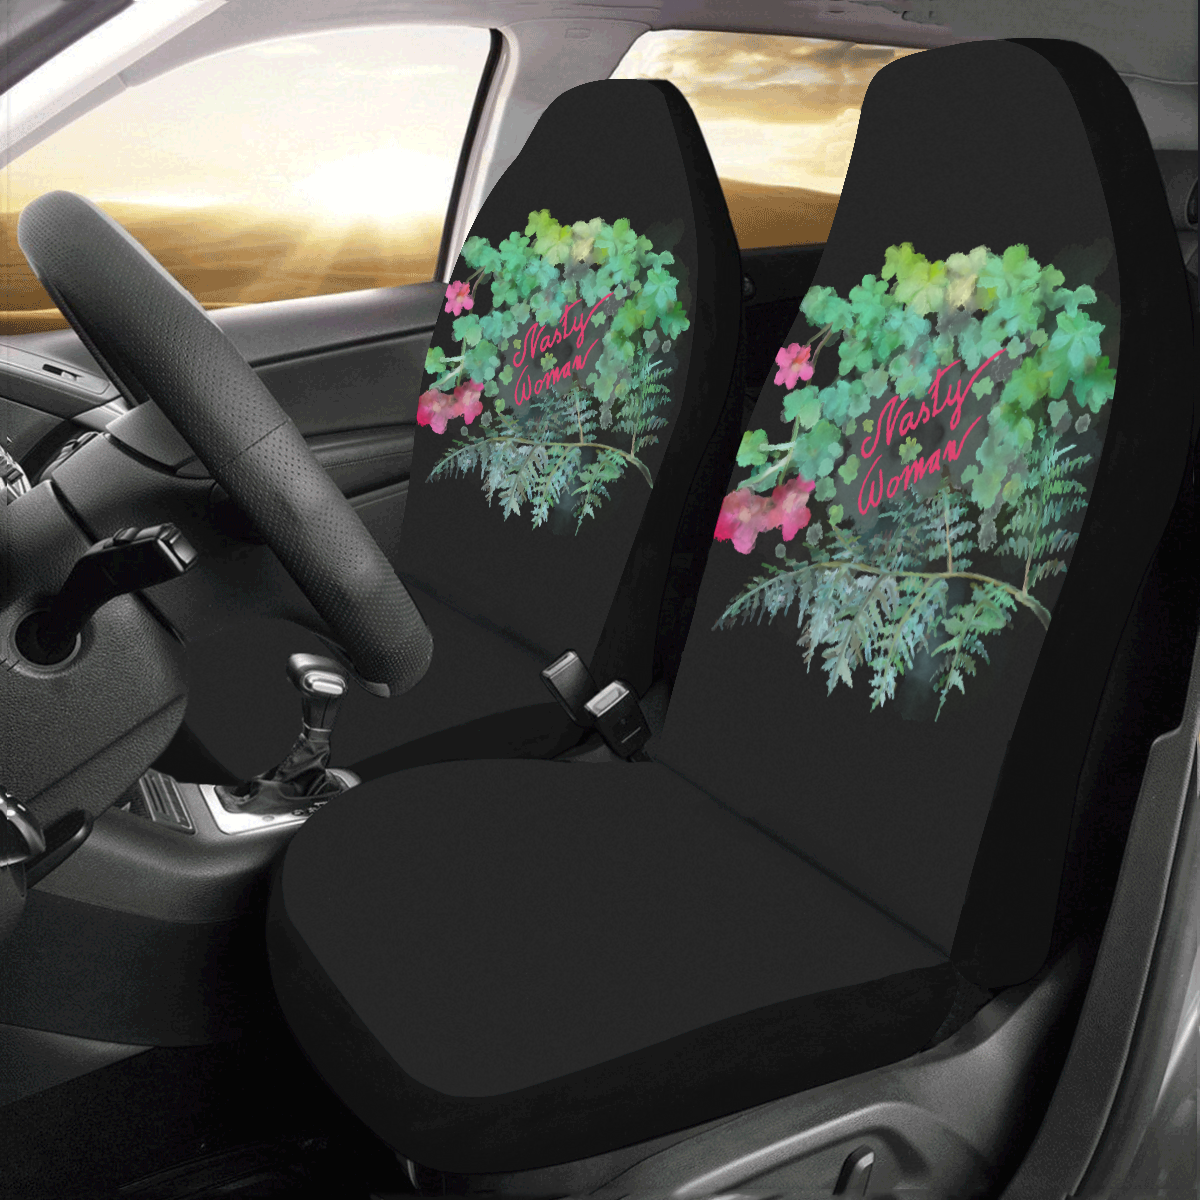 Nasty Woman, floral watercolor Car Seat Covers (Set of 2)